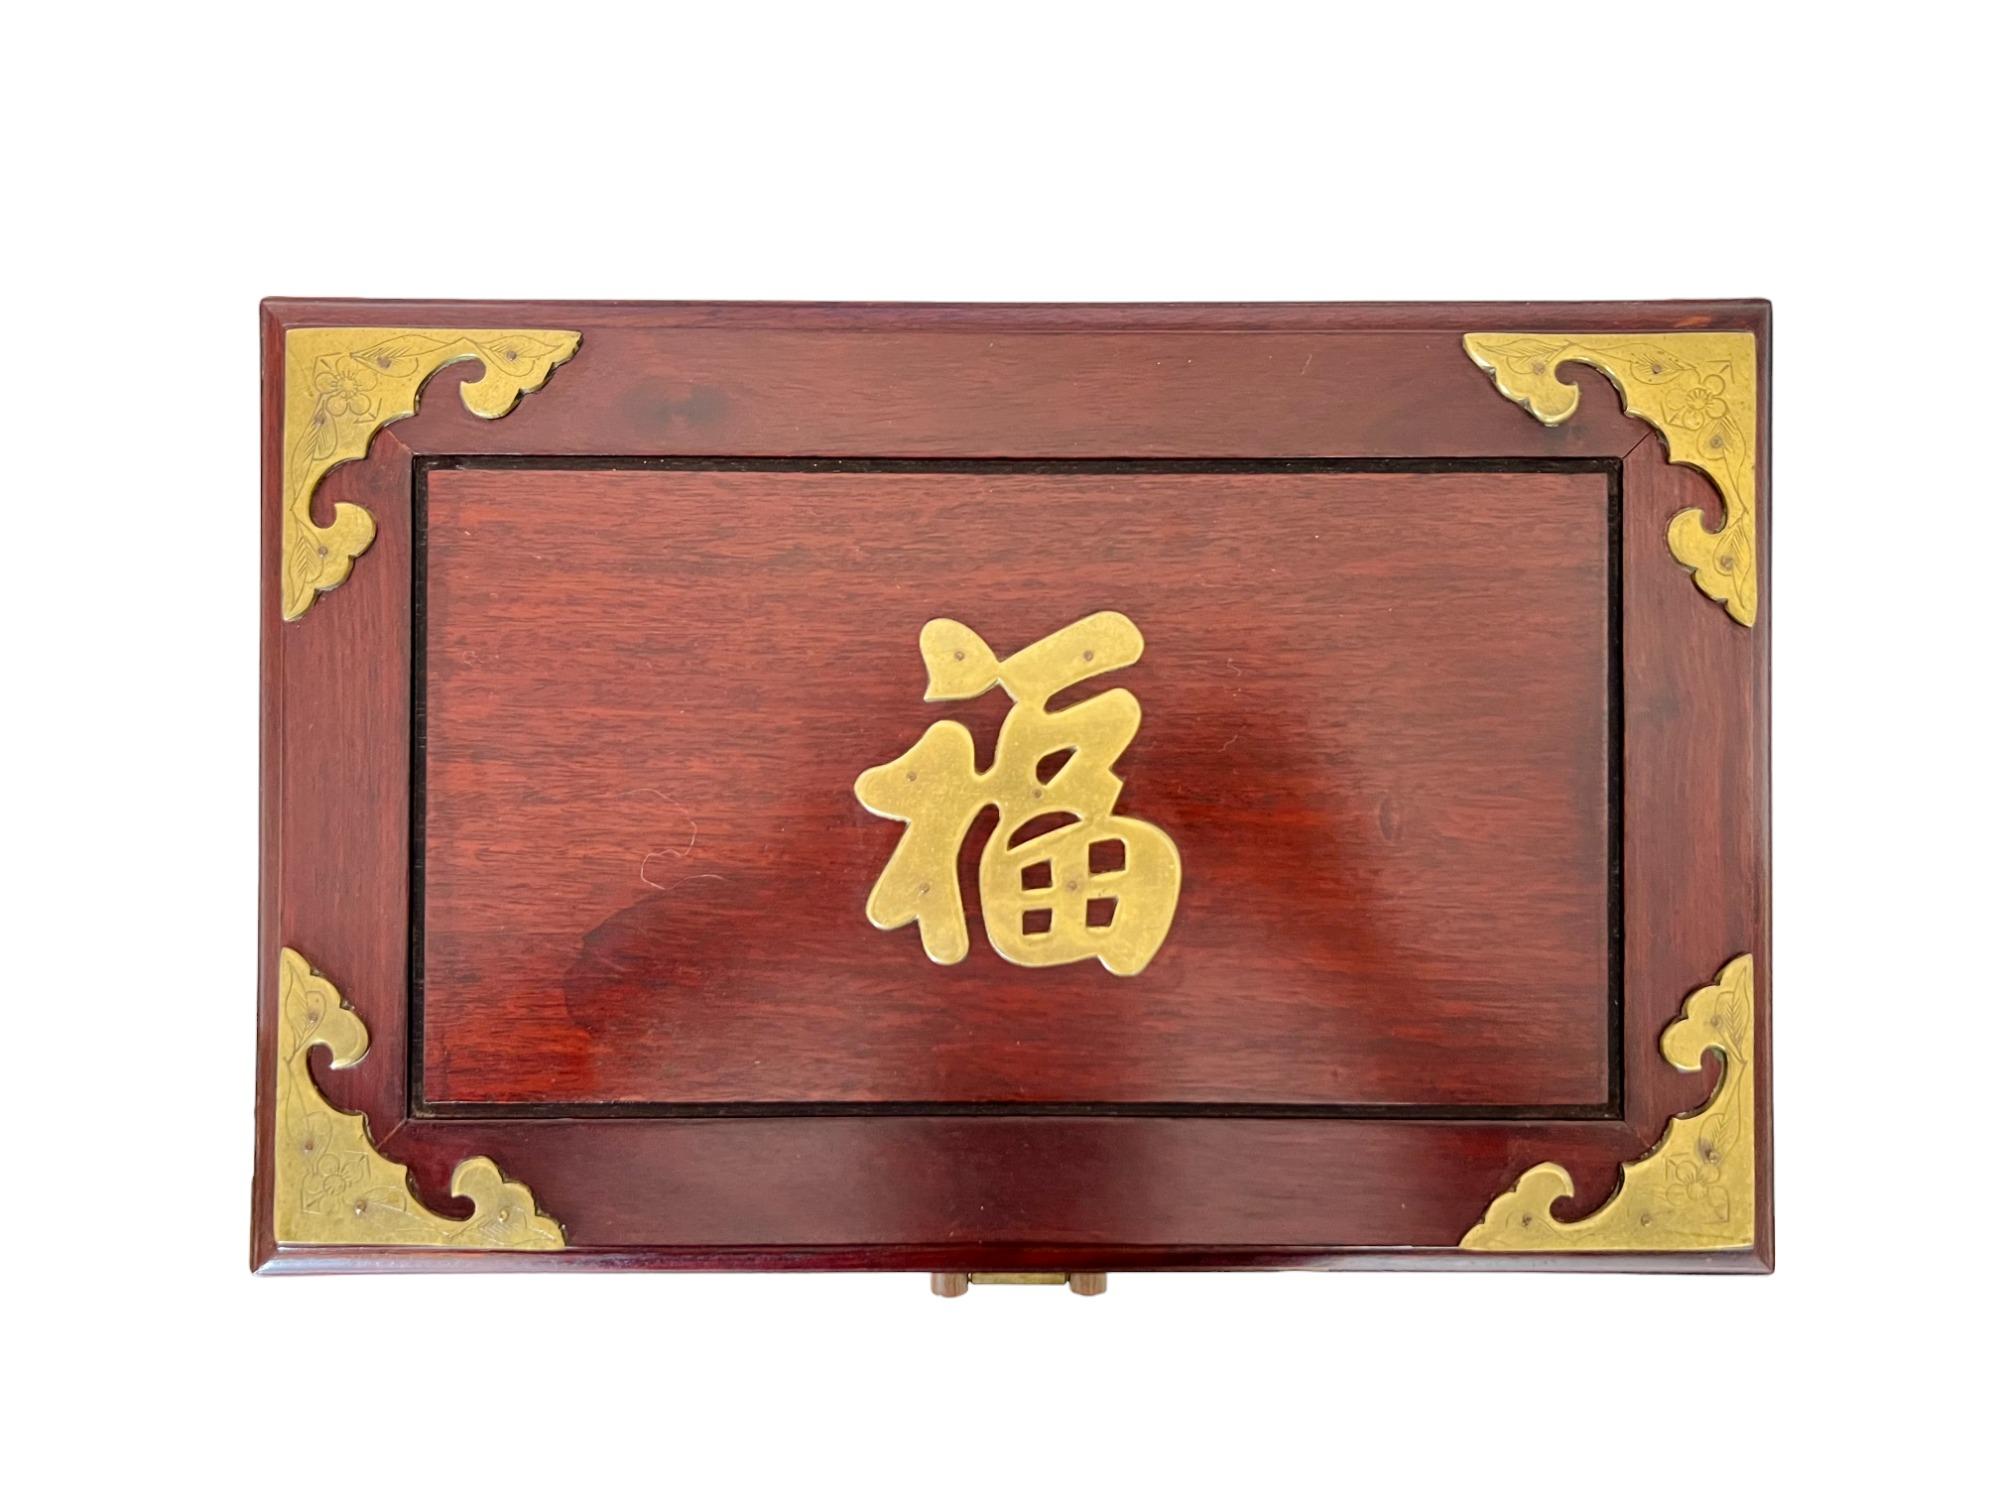 Chinese Export Vintage Chinese Brass Accented Wood Jewelry Box Chest